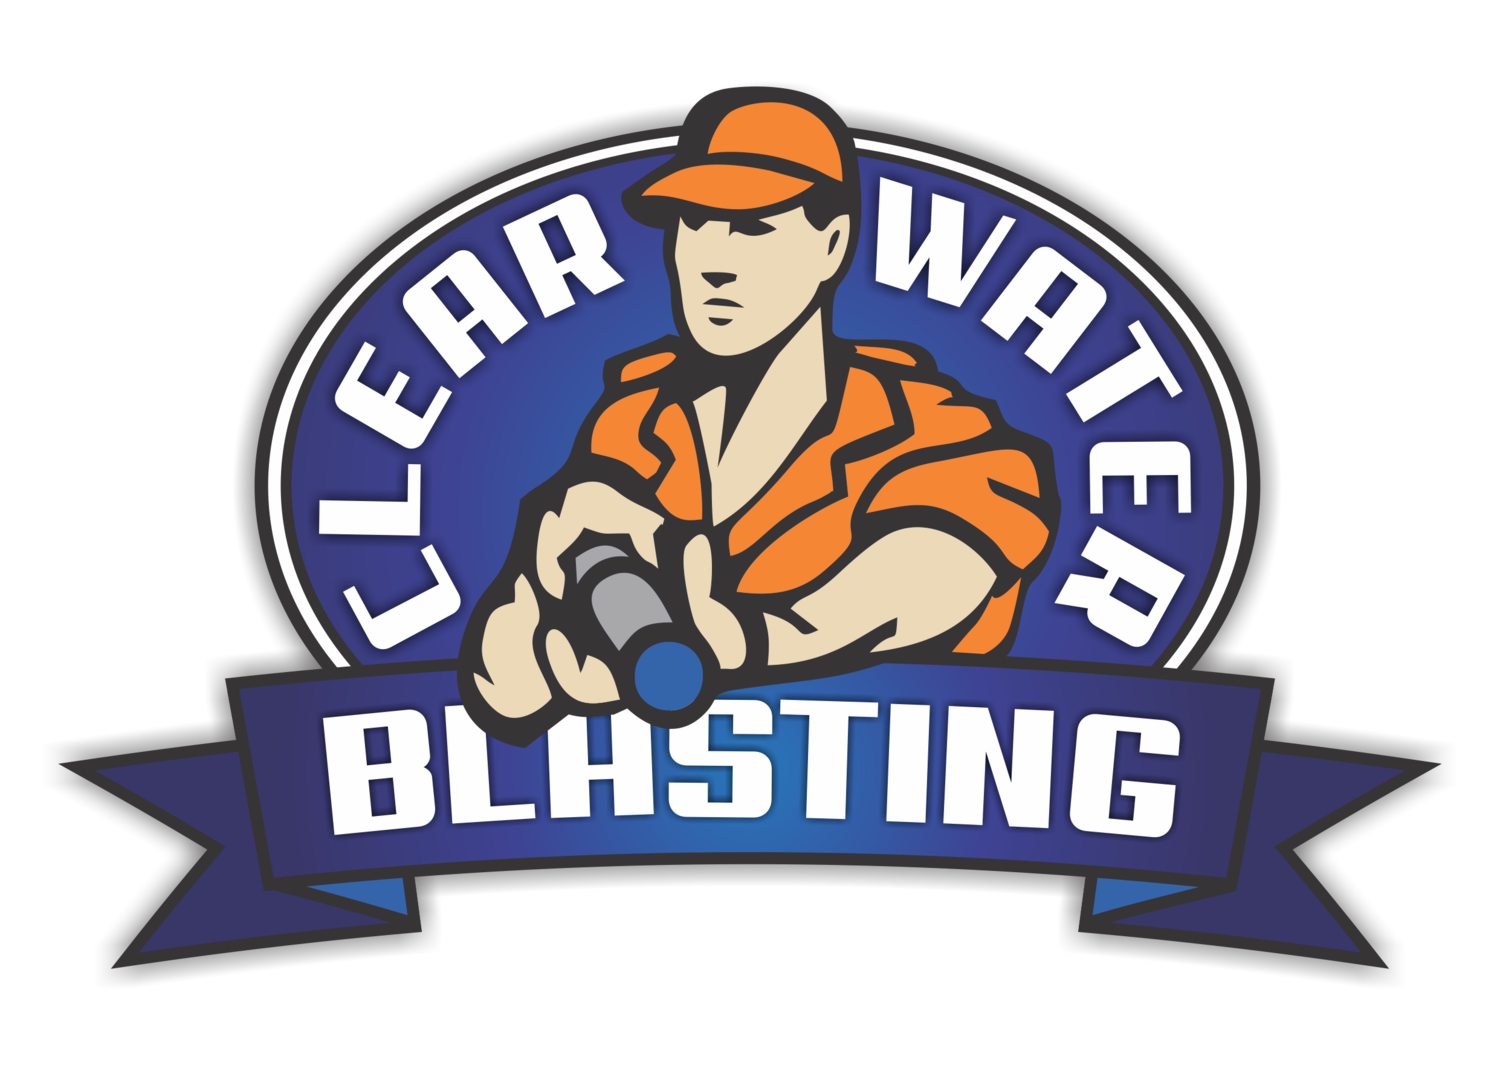 CLEAR WATER BLASTING SERVICES